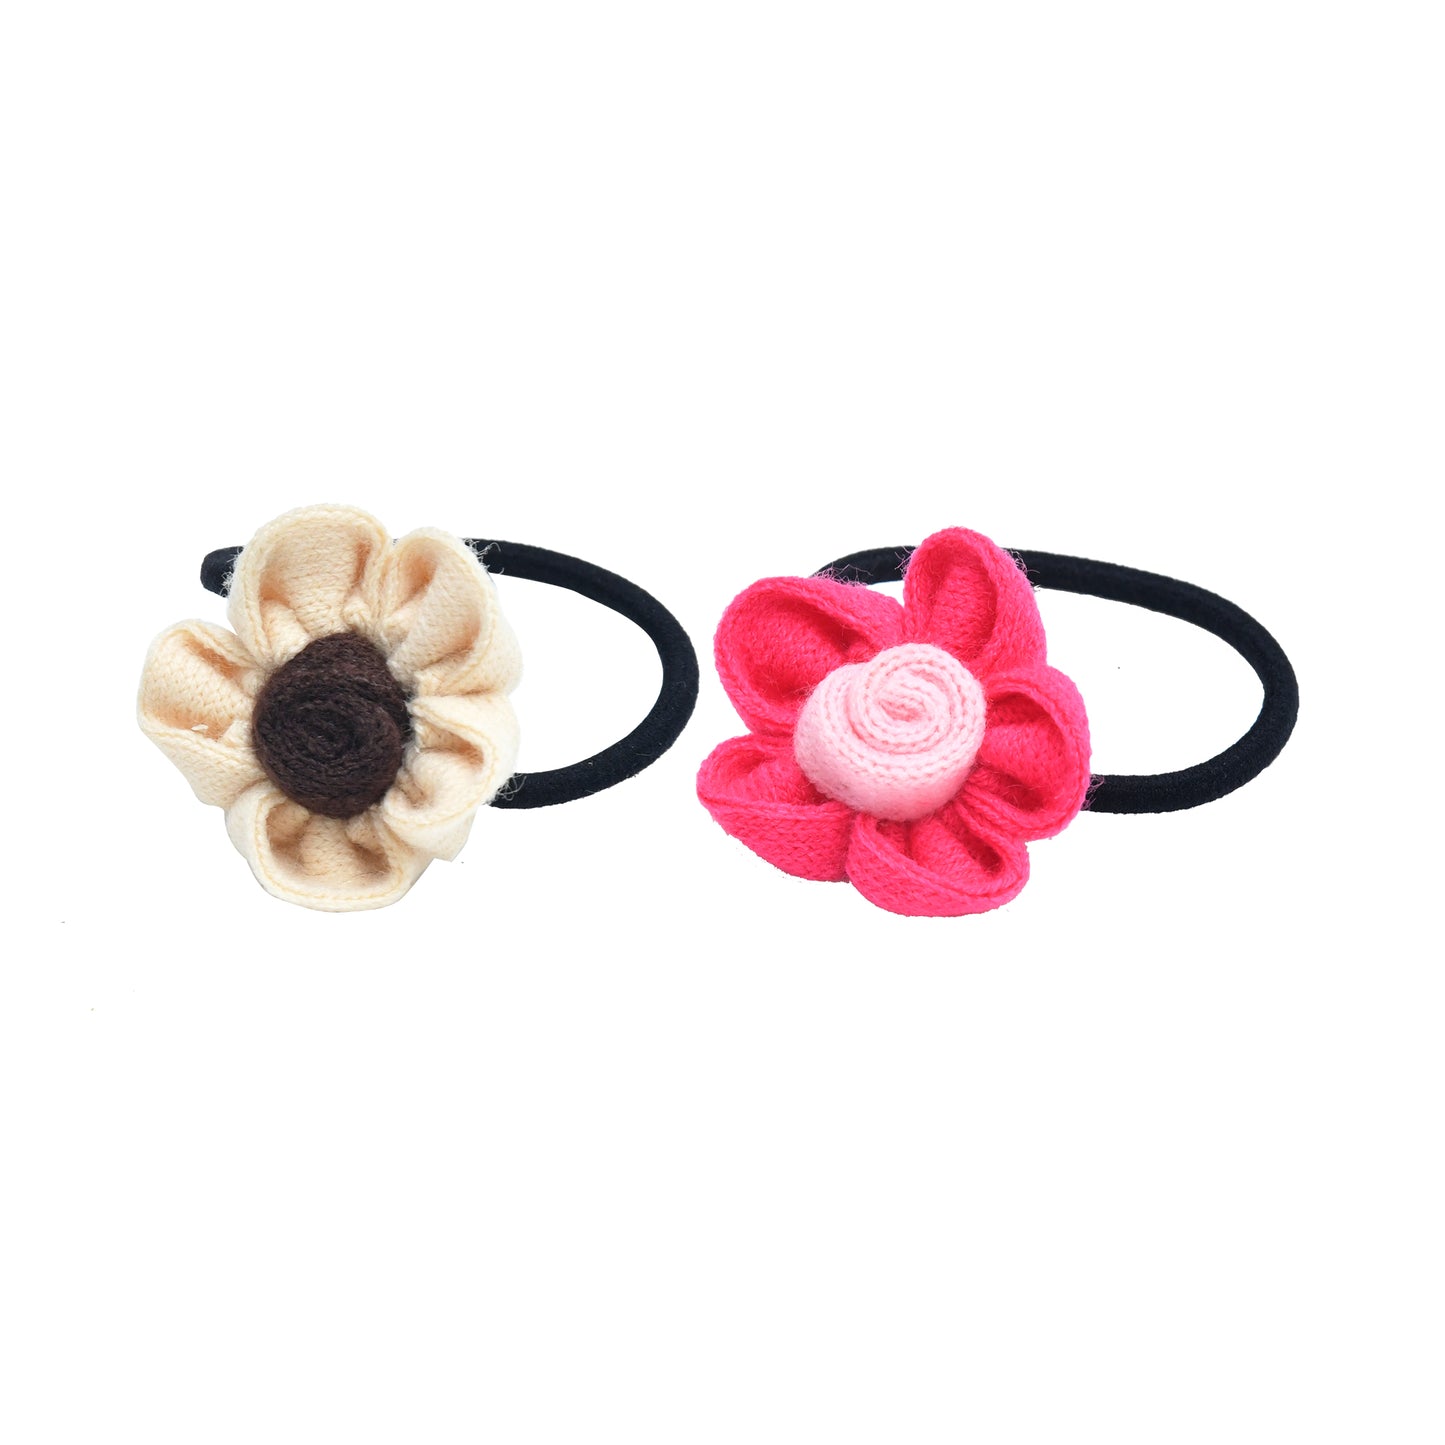 Set of 2 Multicolor Floral Hair Ties for Girls